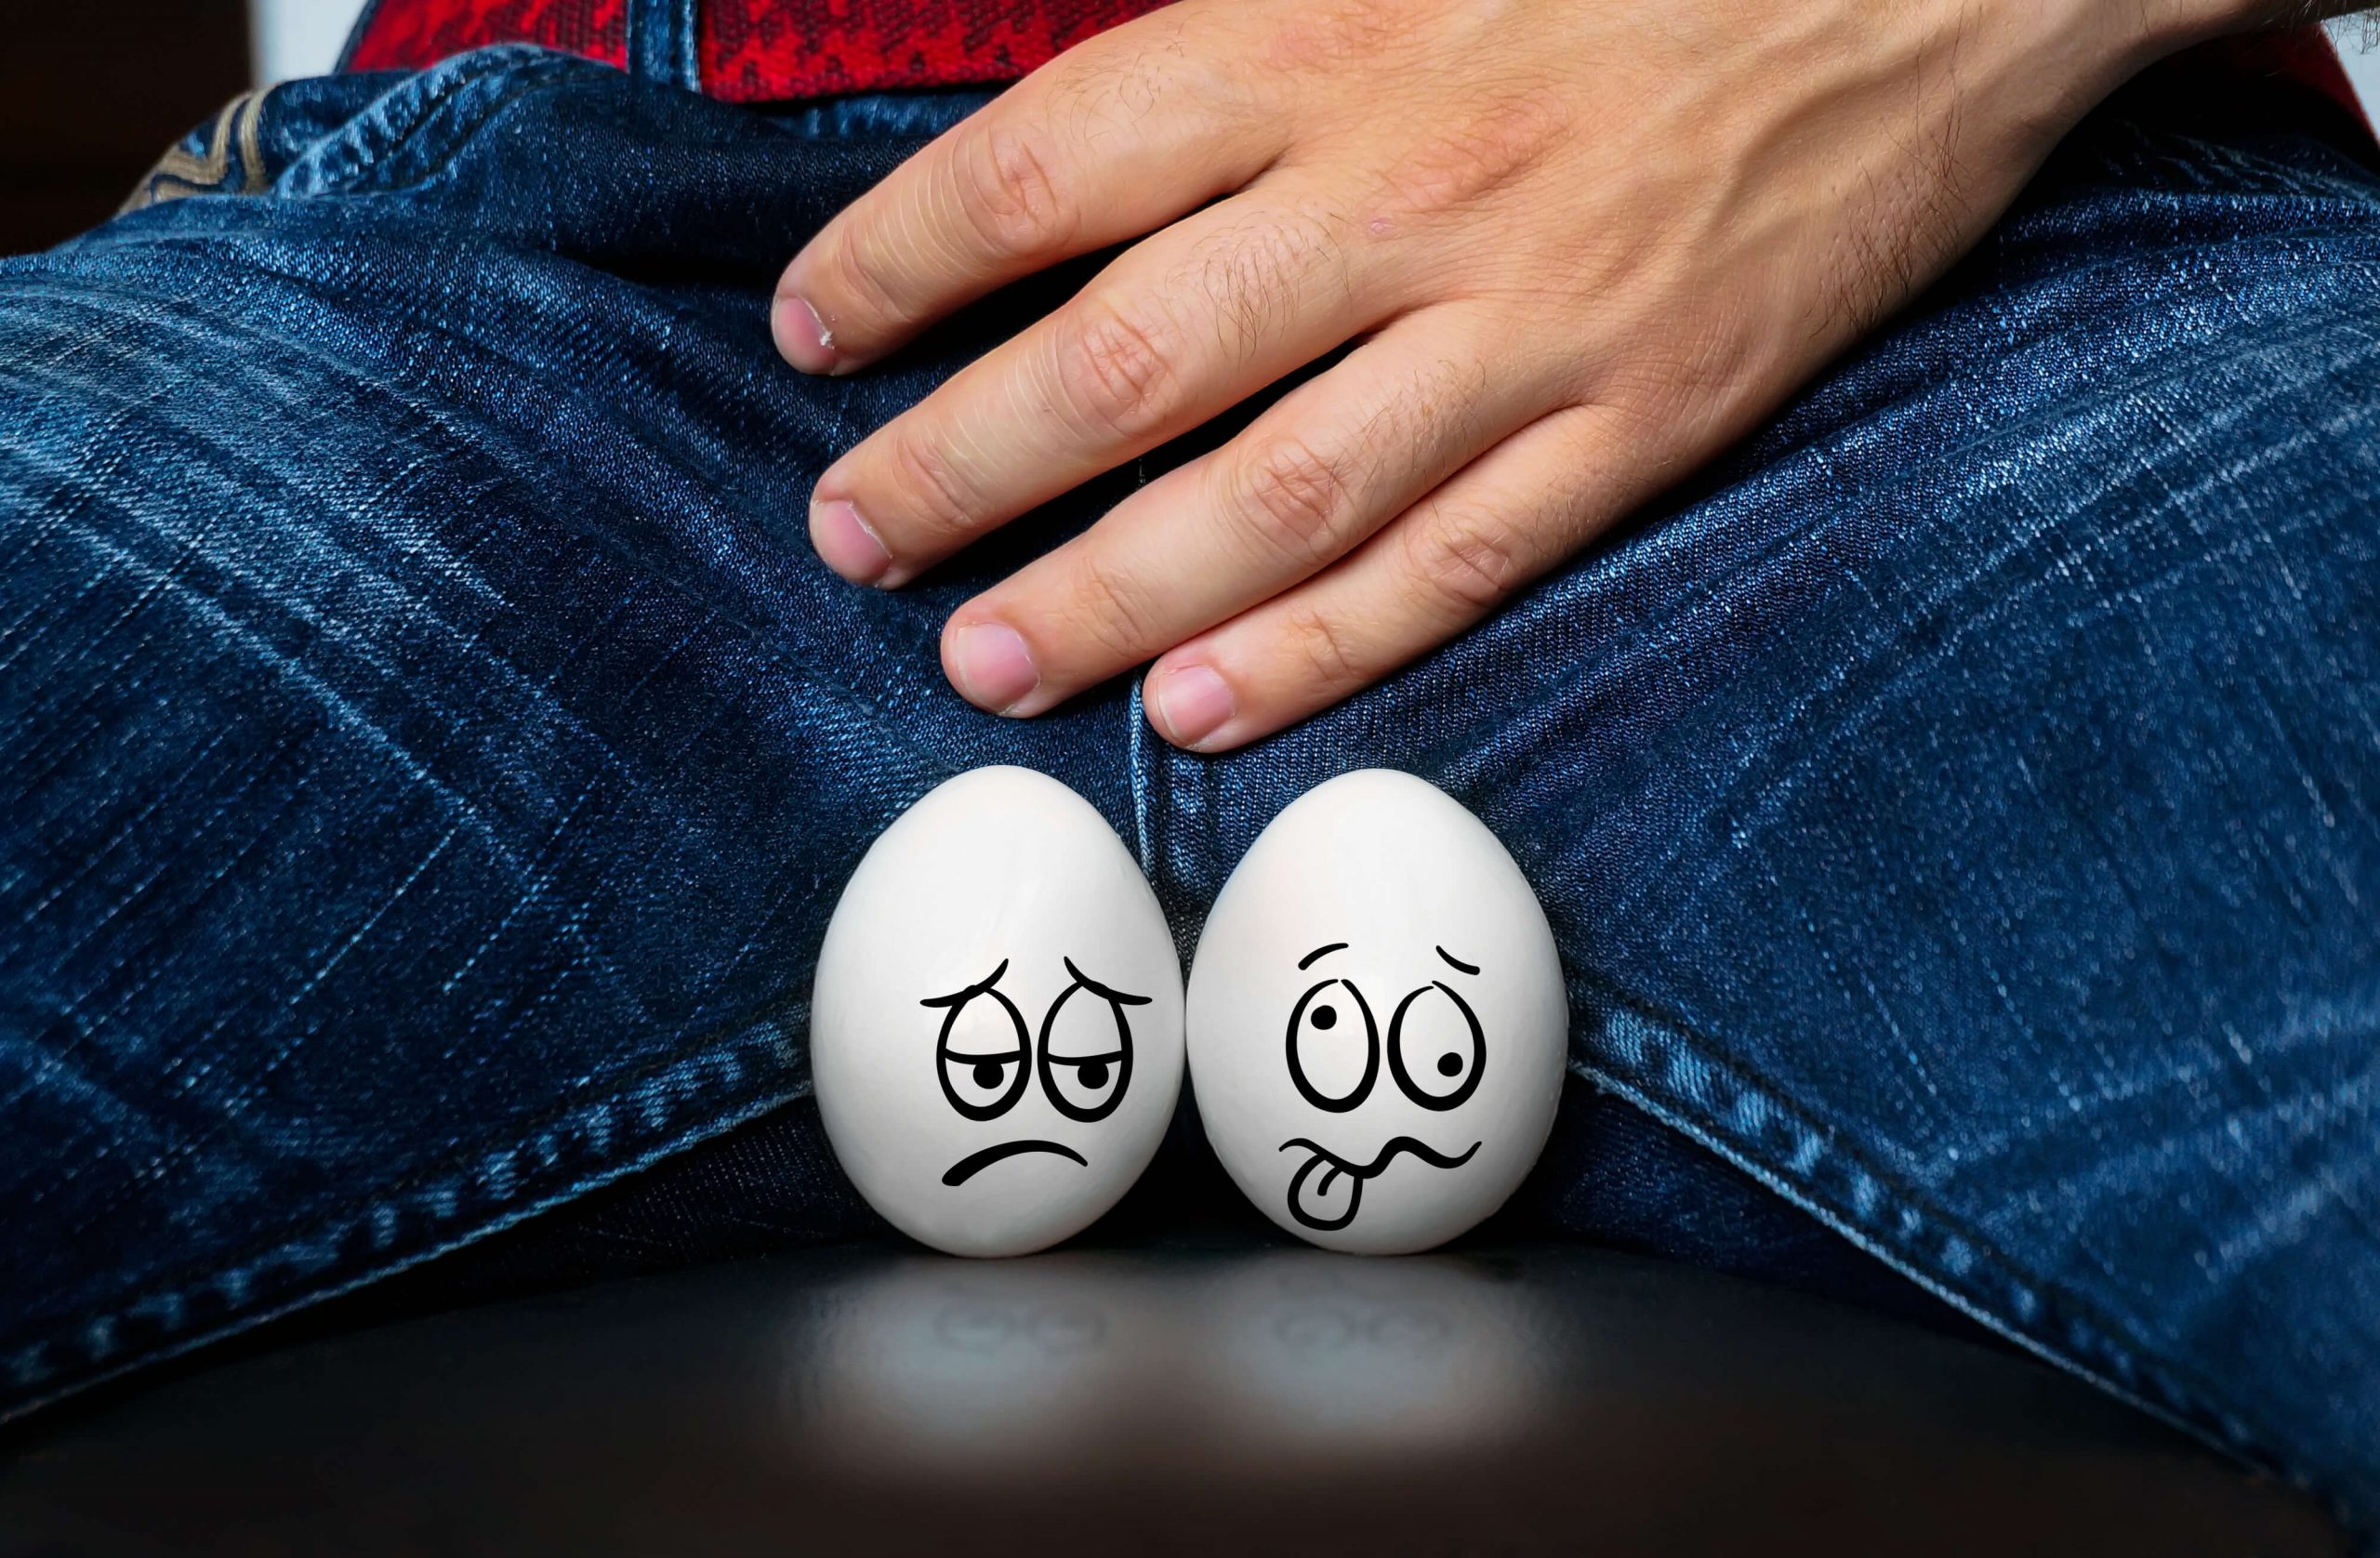 Testicular Pain Diagnosis And Home Remedies One Should Be Aware Of